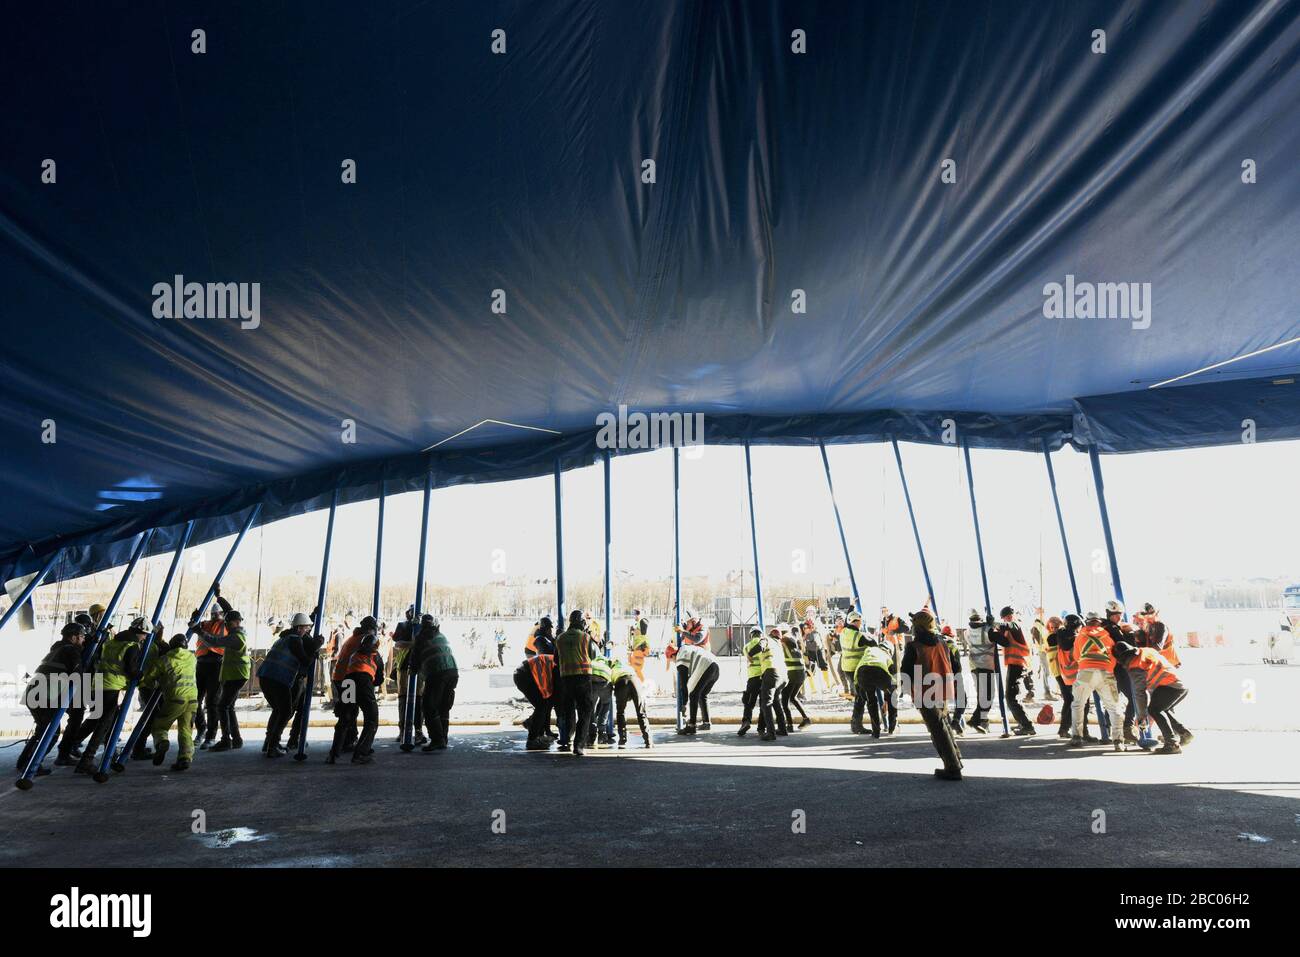 Cirque du Soleil sets up its circus tent for the show "Totem" on Munich's Theresienwiese. [automated translation] Stock Photo